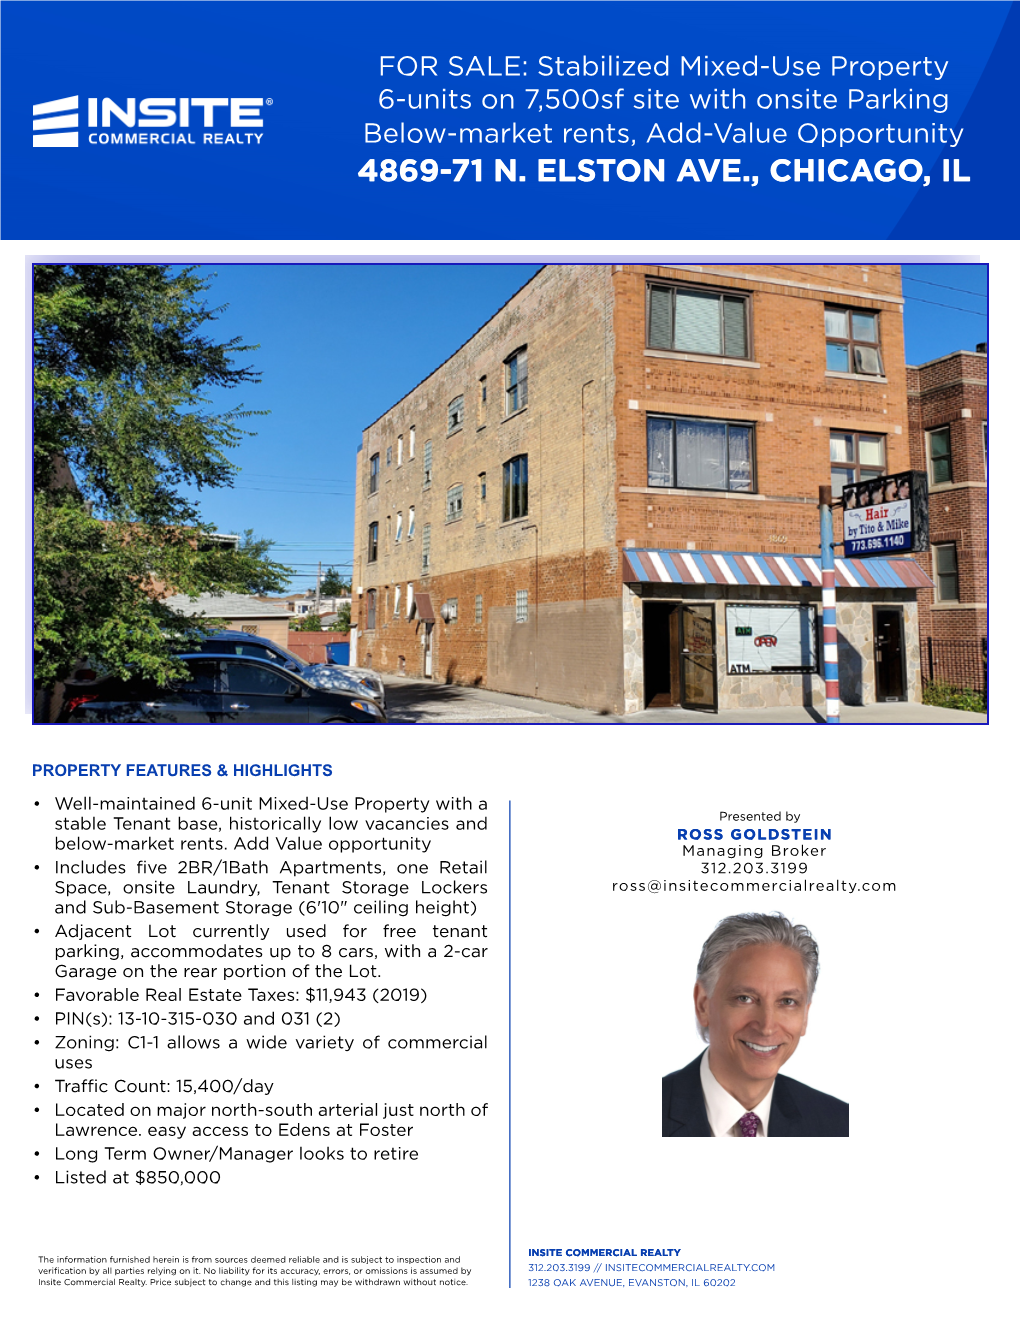 4869-71 N. Elston Ave., Chica Ve., Chicago, Il